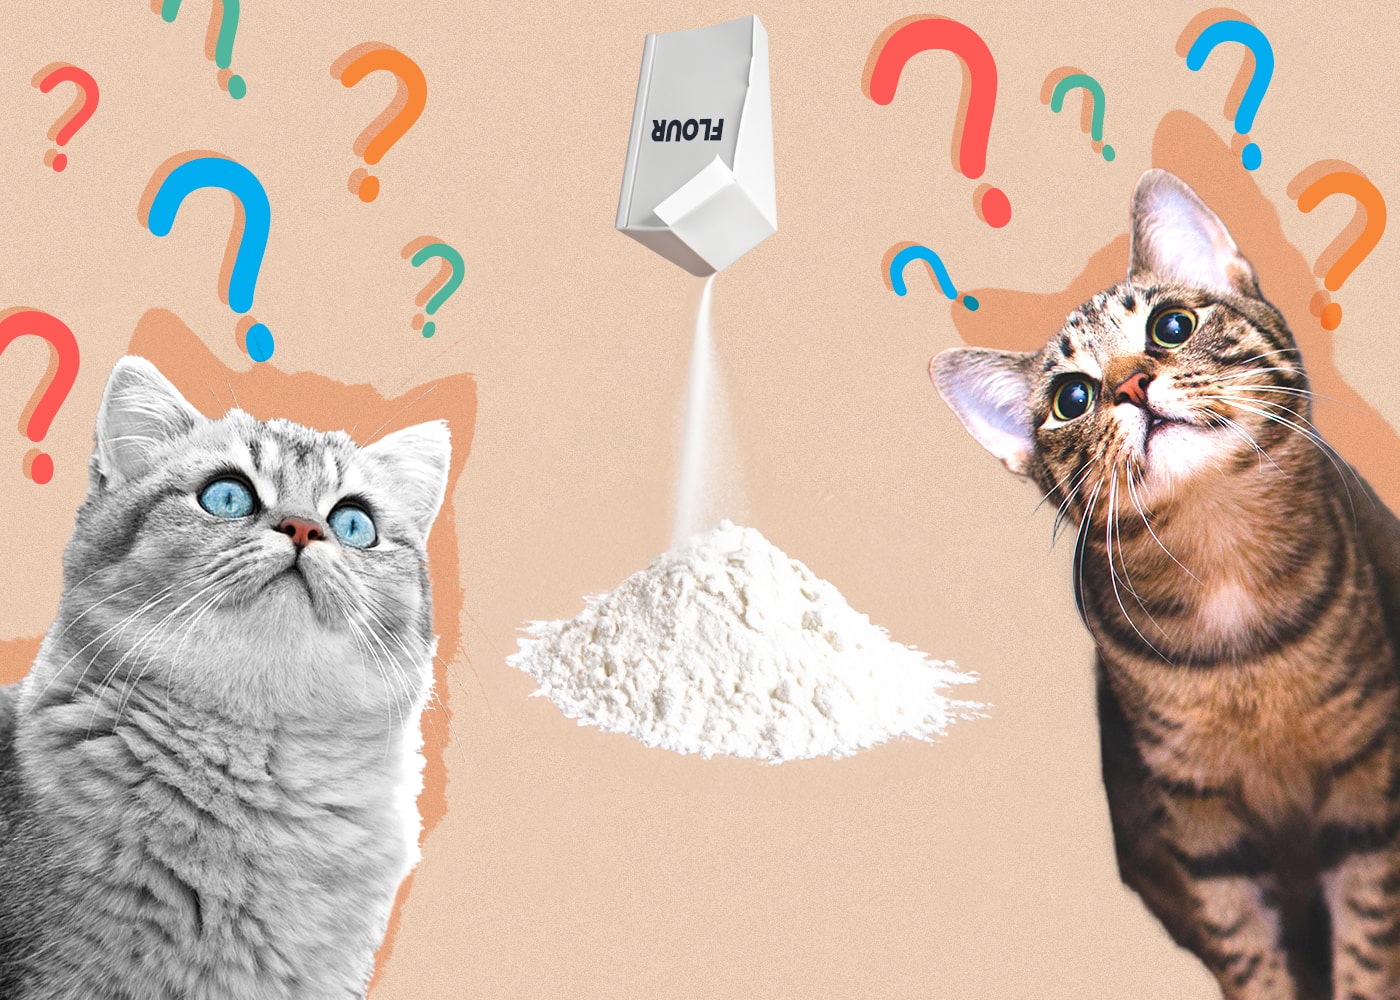 What Human Food can Cats eat?, Answered by Vets